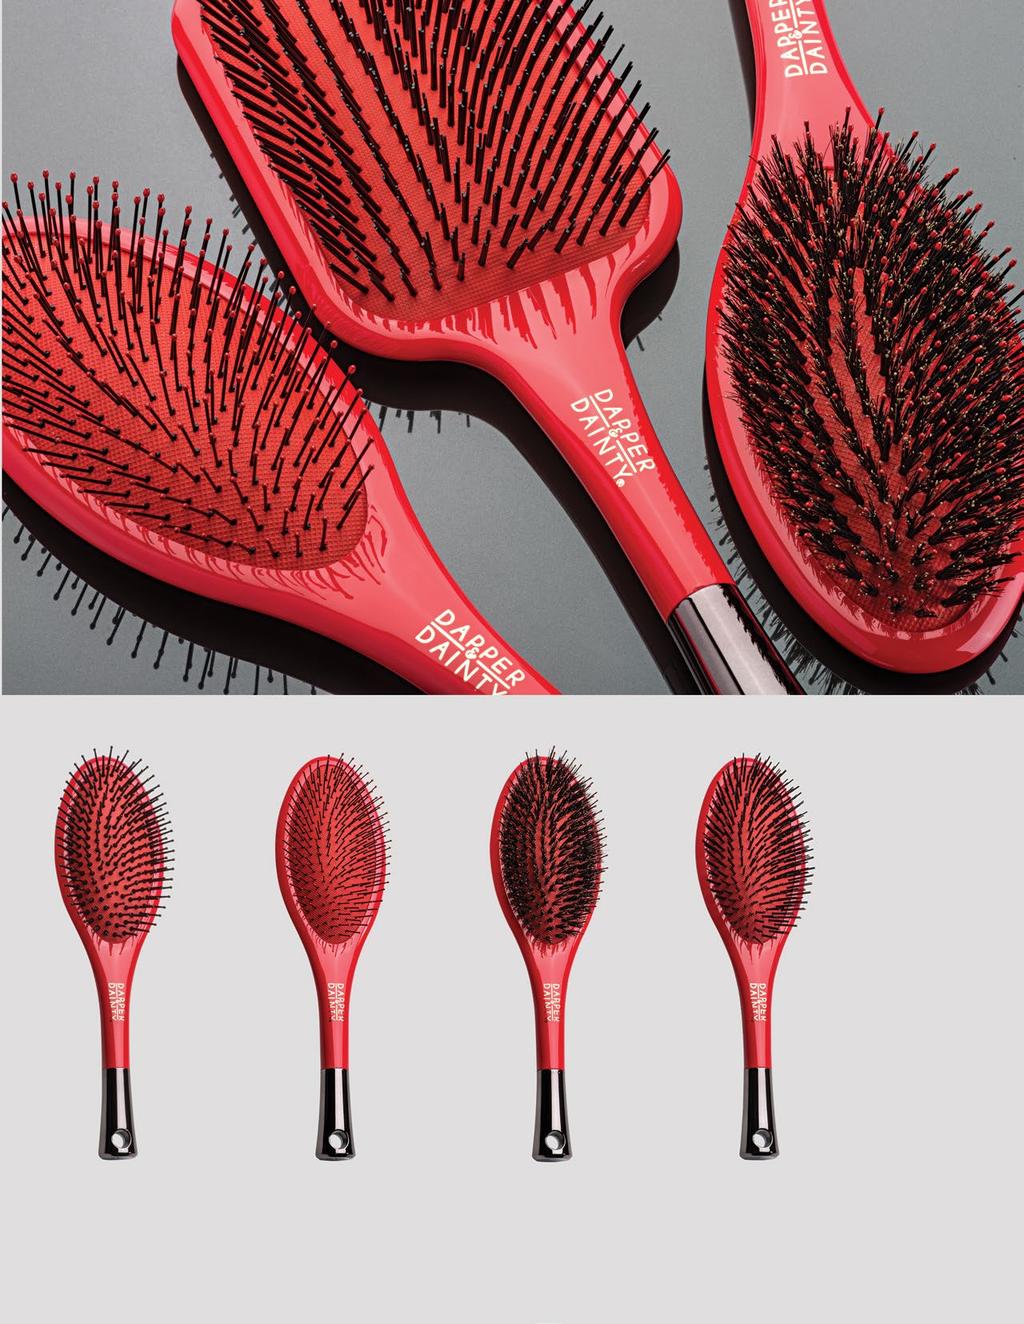 FROM LEFT TO RIGHT: #80008, #80004, #80009 #80007 Super Slim Oval Brush Lightweight super slim & hollow handle comfortable soft cushion Great for all hair types #80008 Super Slim Oval Detangling